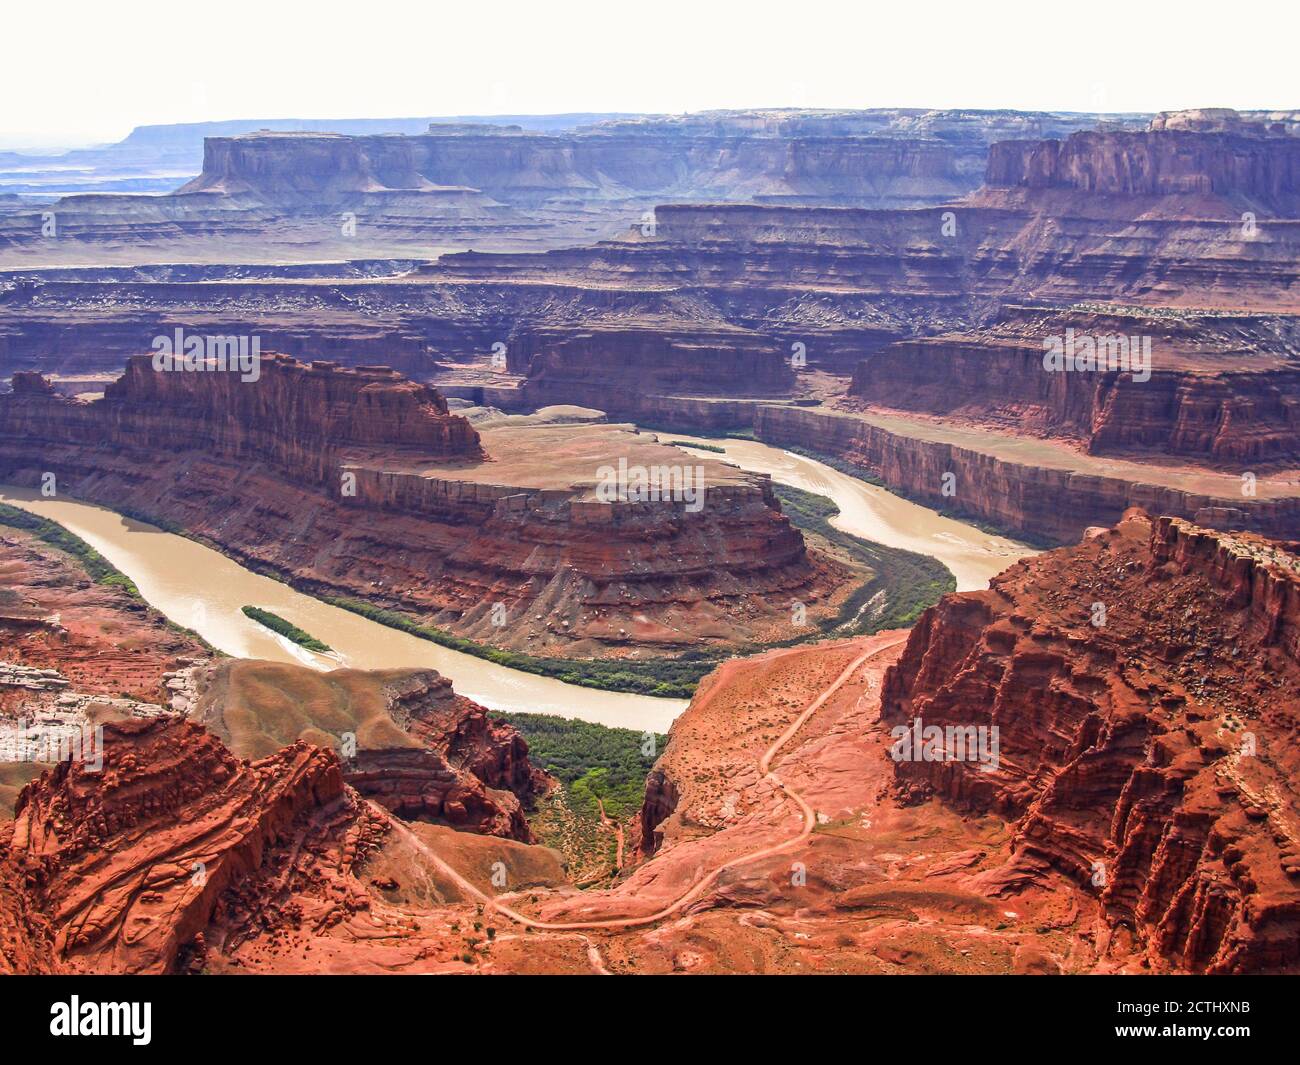 The gooseneck bend in the Colorado River, as seen from the main look-out point at Dead horse point, state park in Utah USA Stock Photo